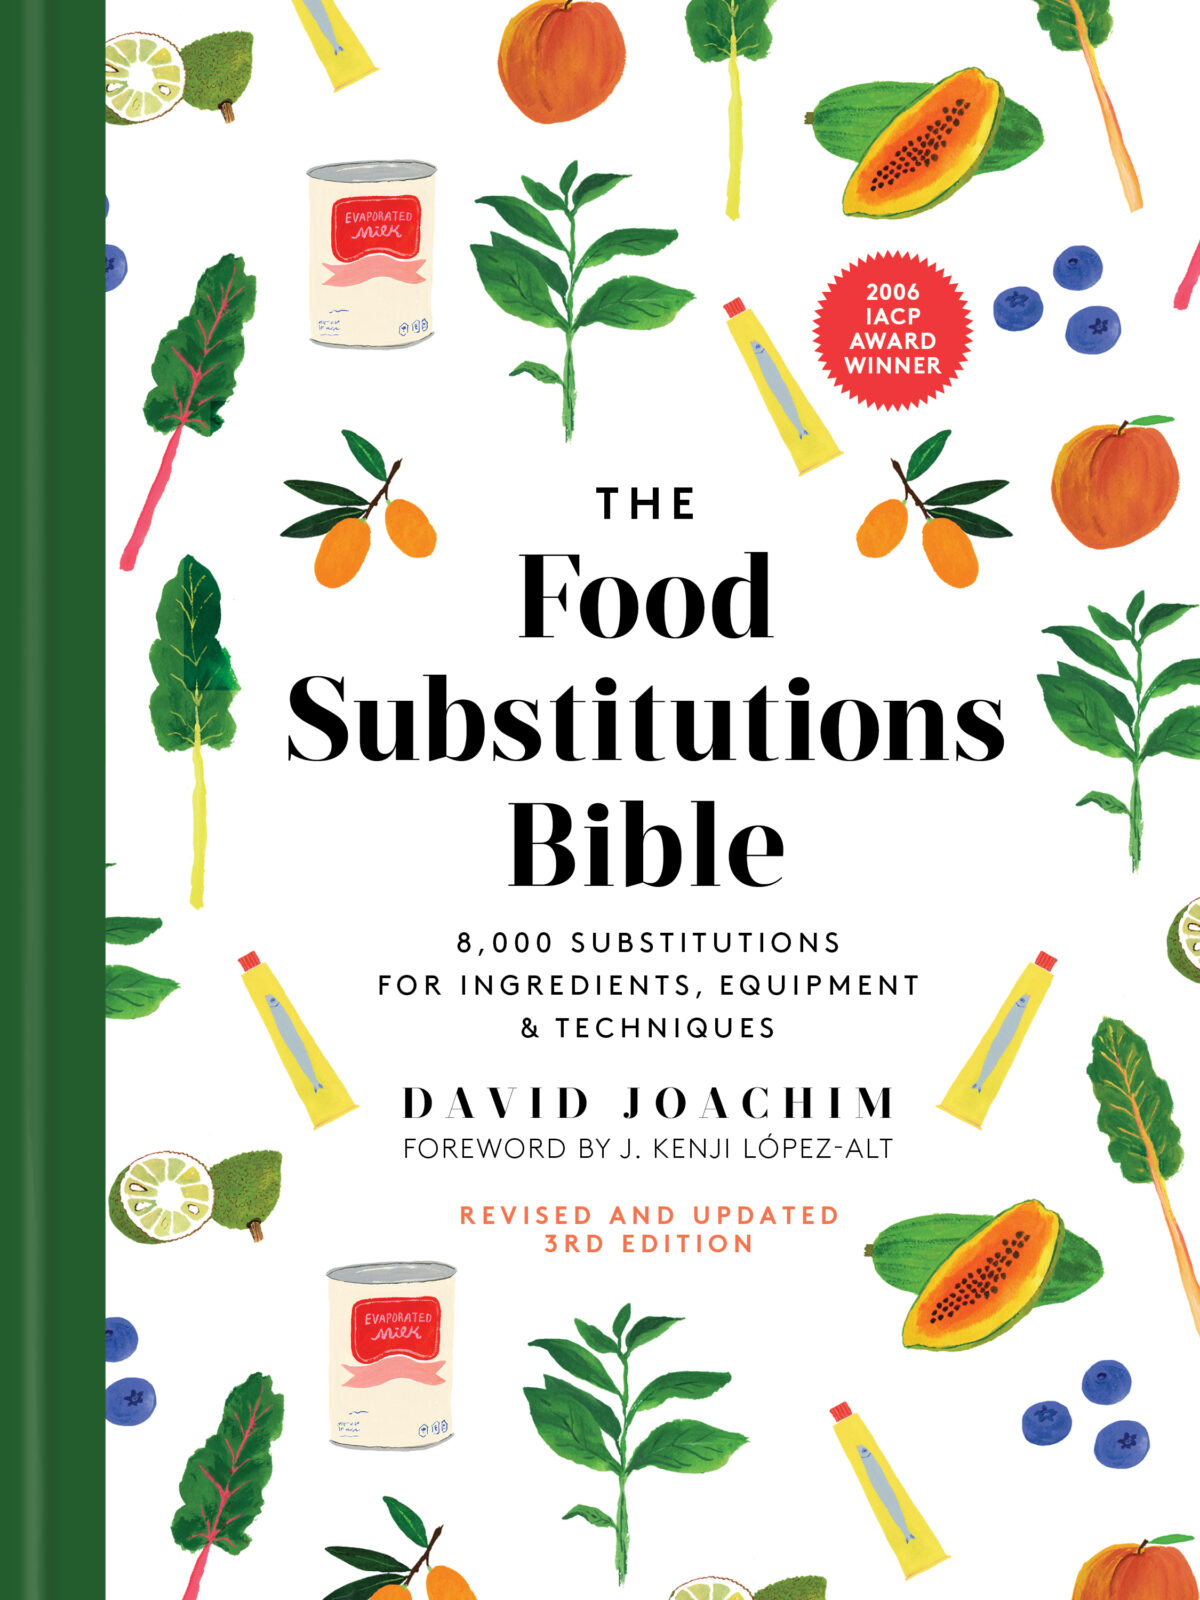 Food Substitutions Bible book cover